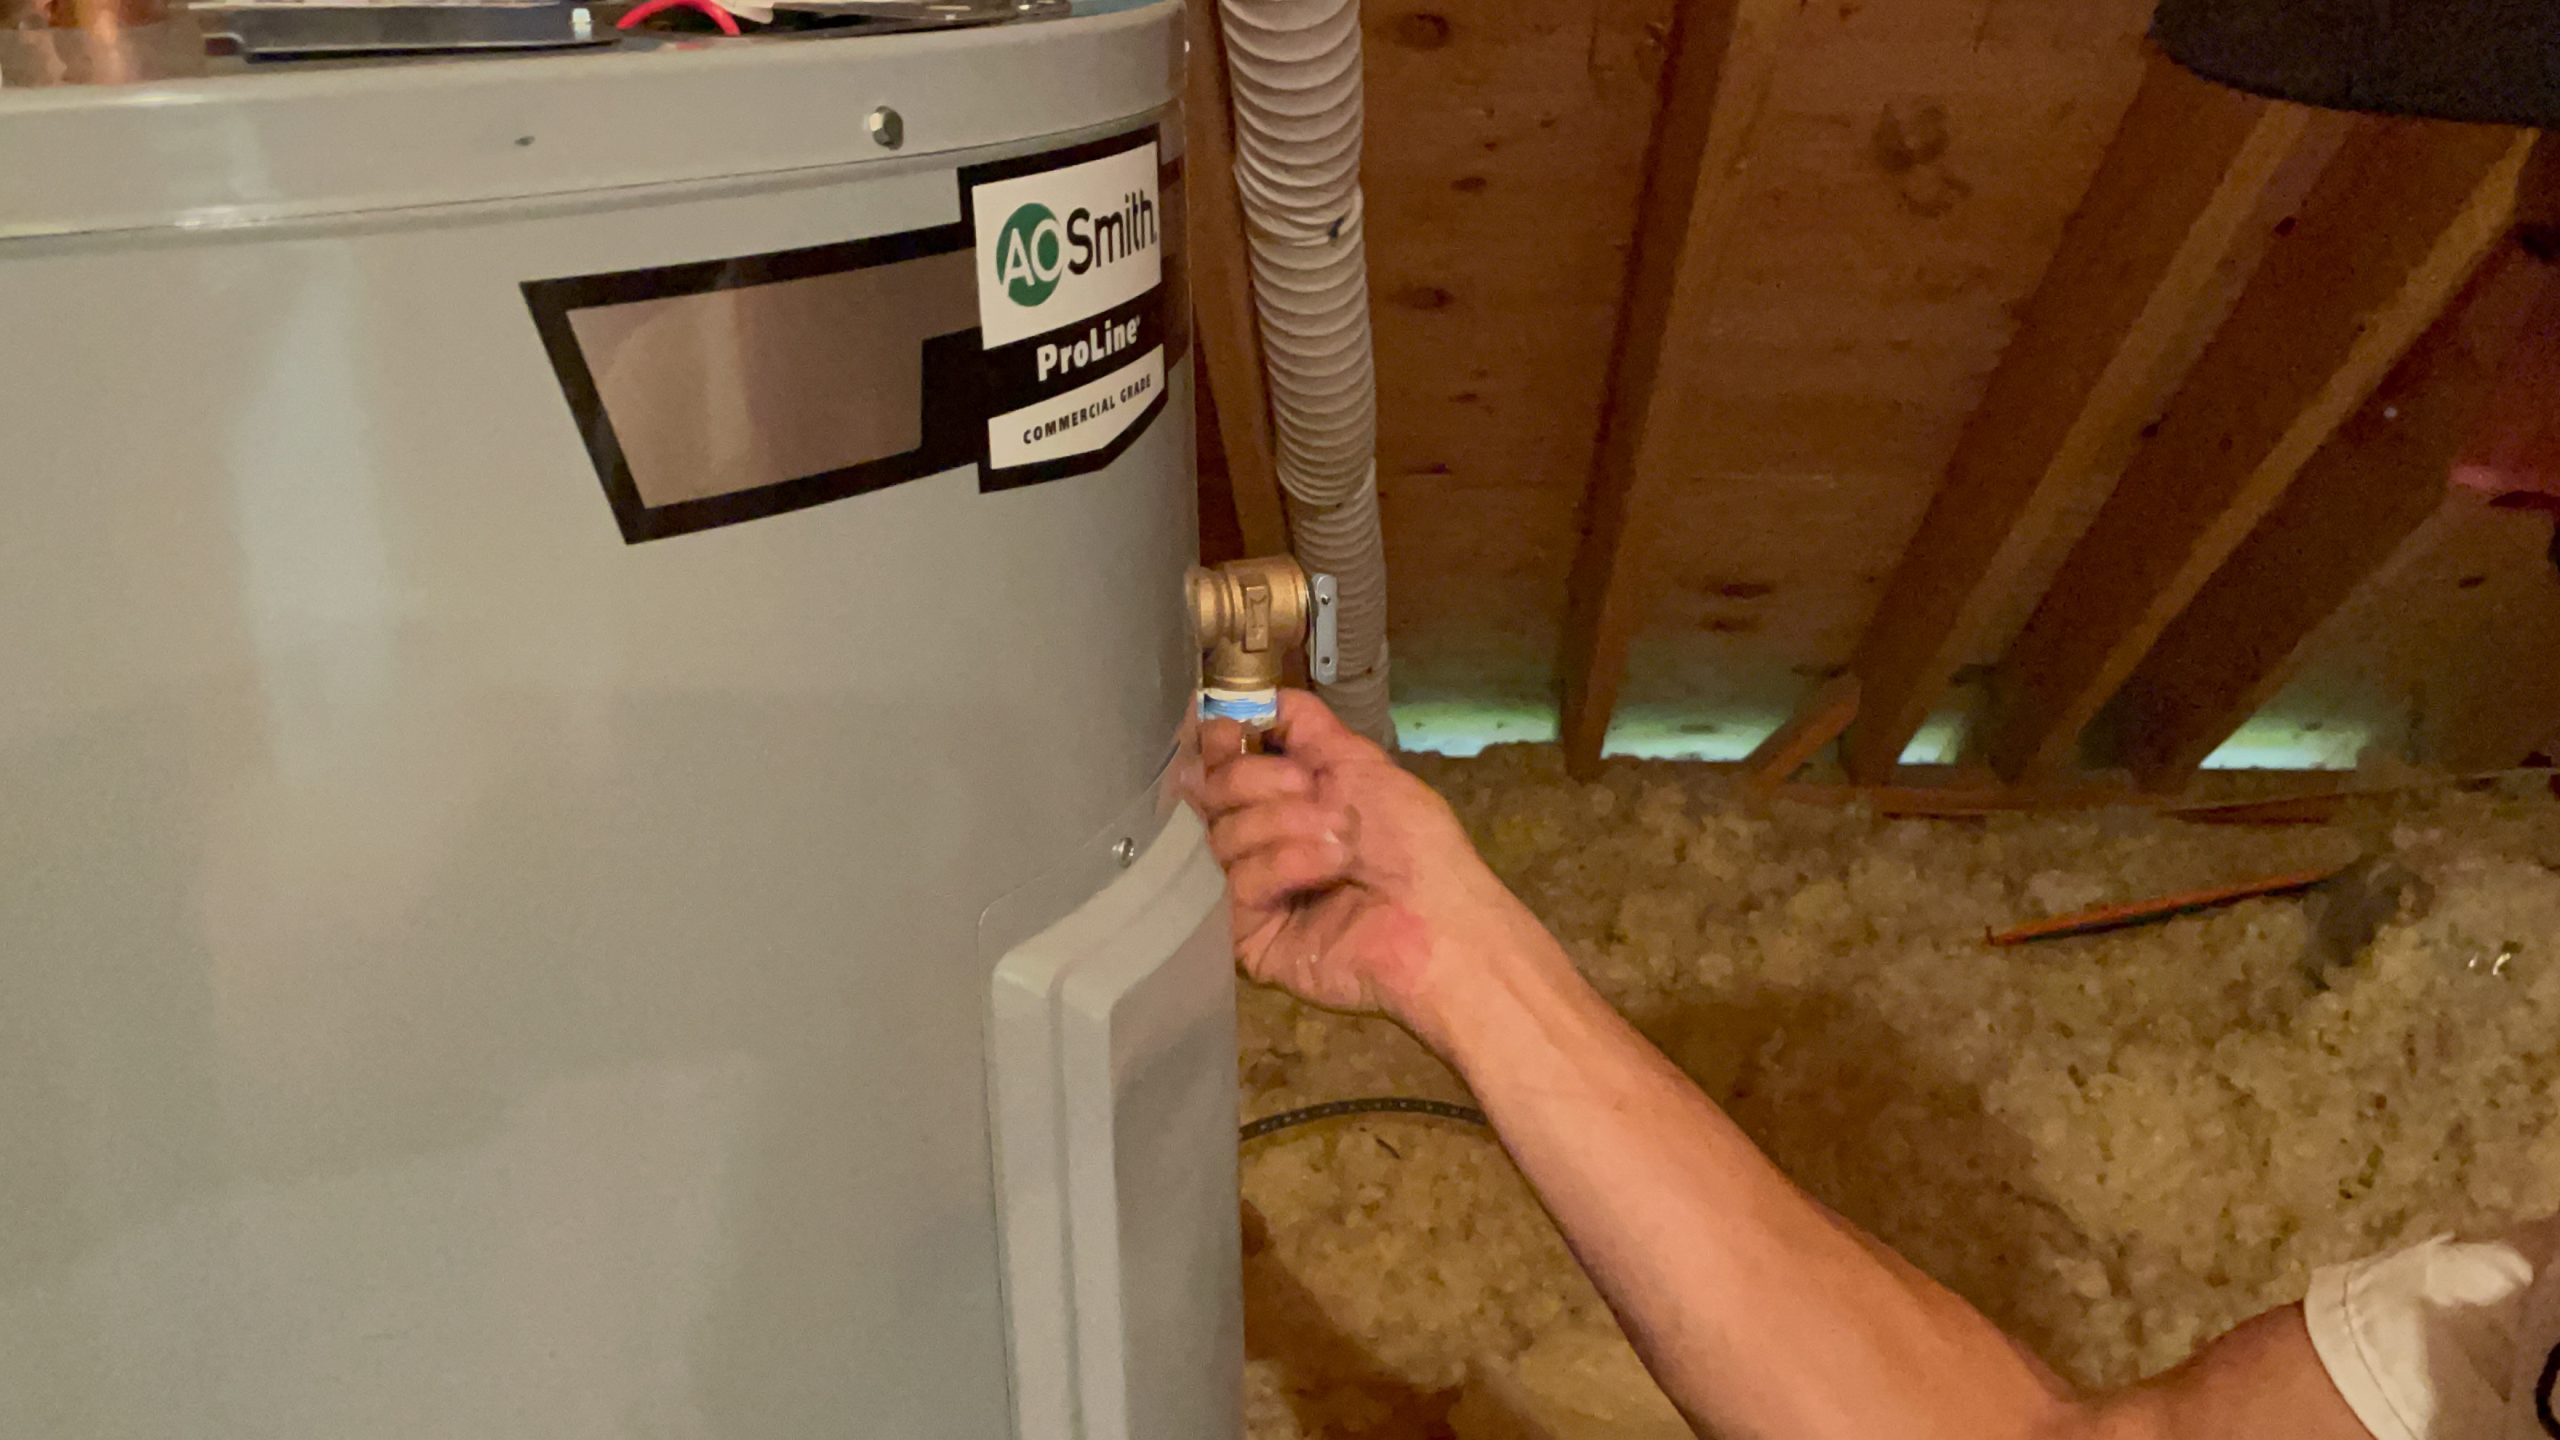 Water Heater Repair in Charleston, SC from Fix-it 24/7 Air Conditioning, Plumbing & Heating